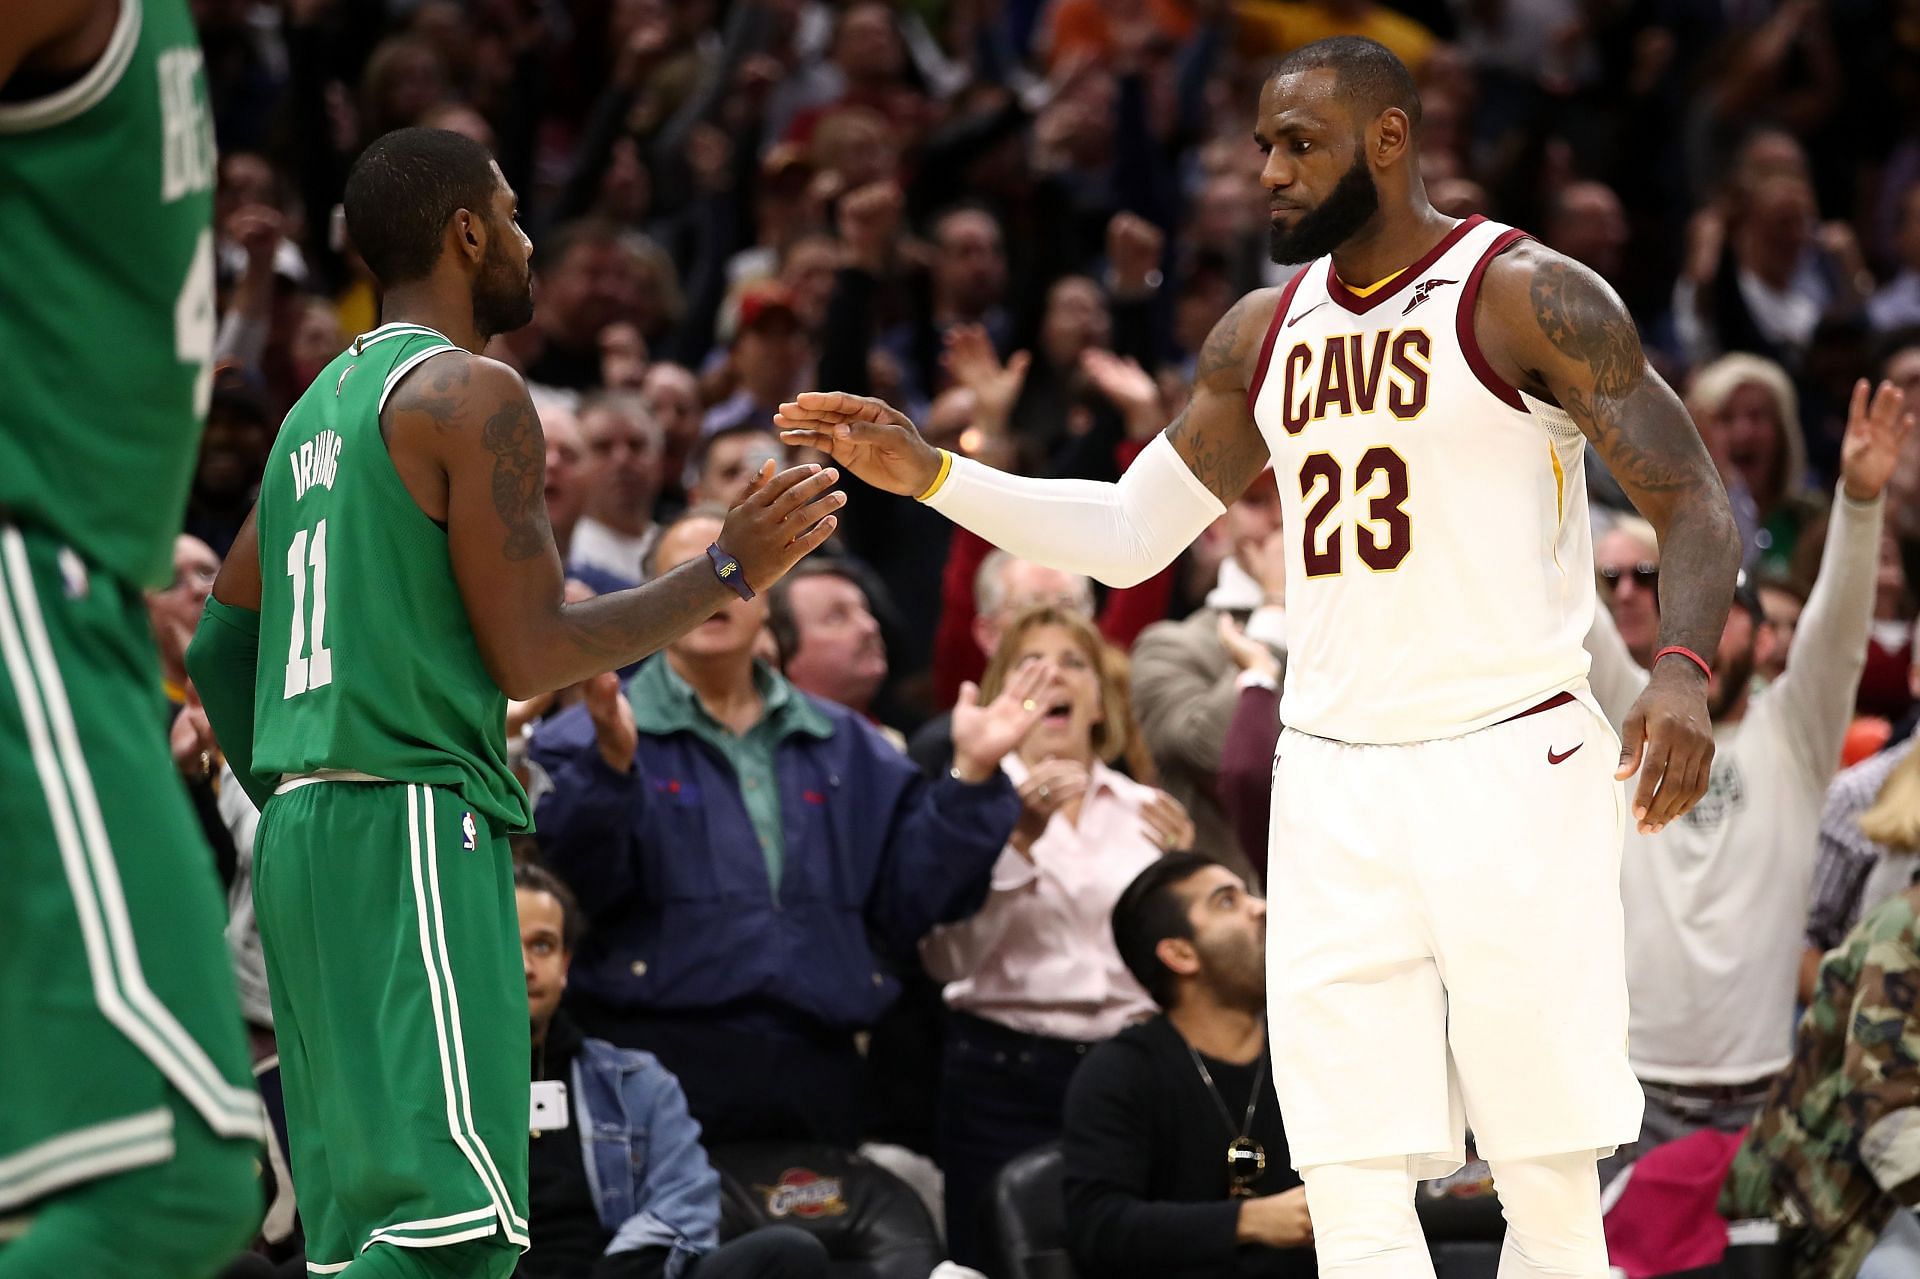 LeBron James of the Cleveland Cavaliers and Kyrie Irving of the Boston Celtics shake hands.